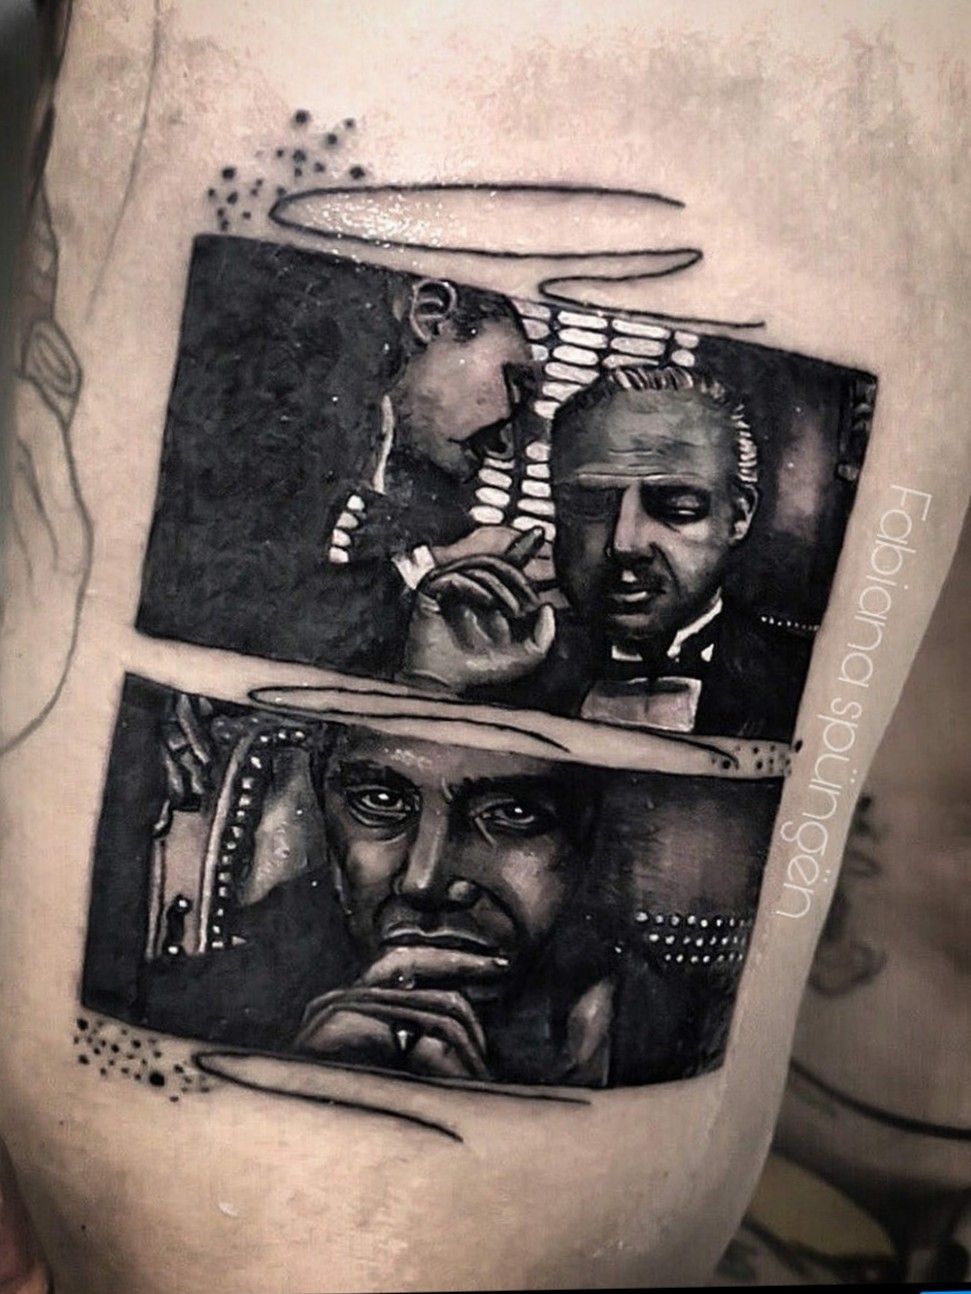 The Godfather - Portraits Calf Tattoo⚡Real-Time Tattooing by Electric Linda  - YouTube